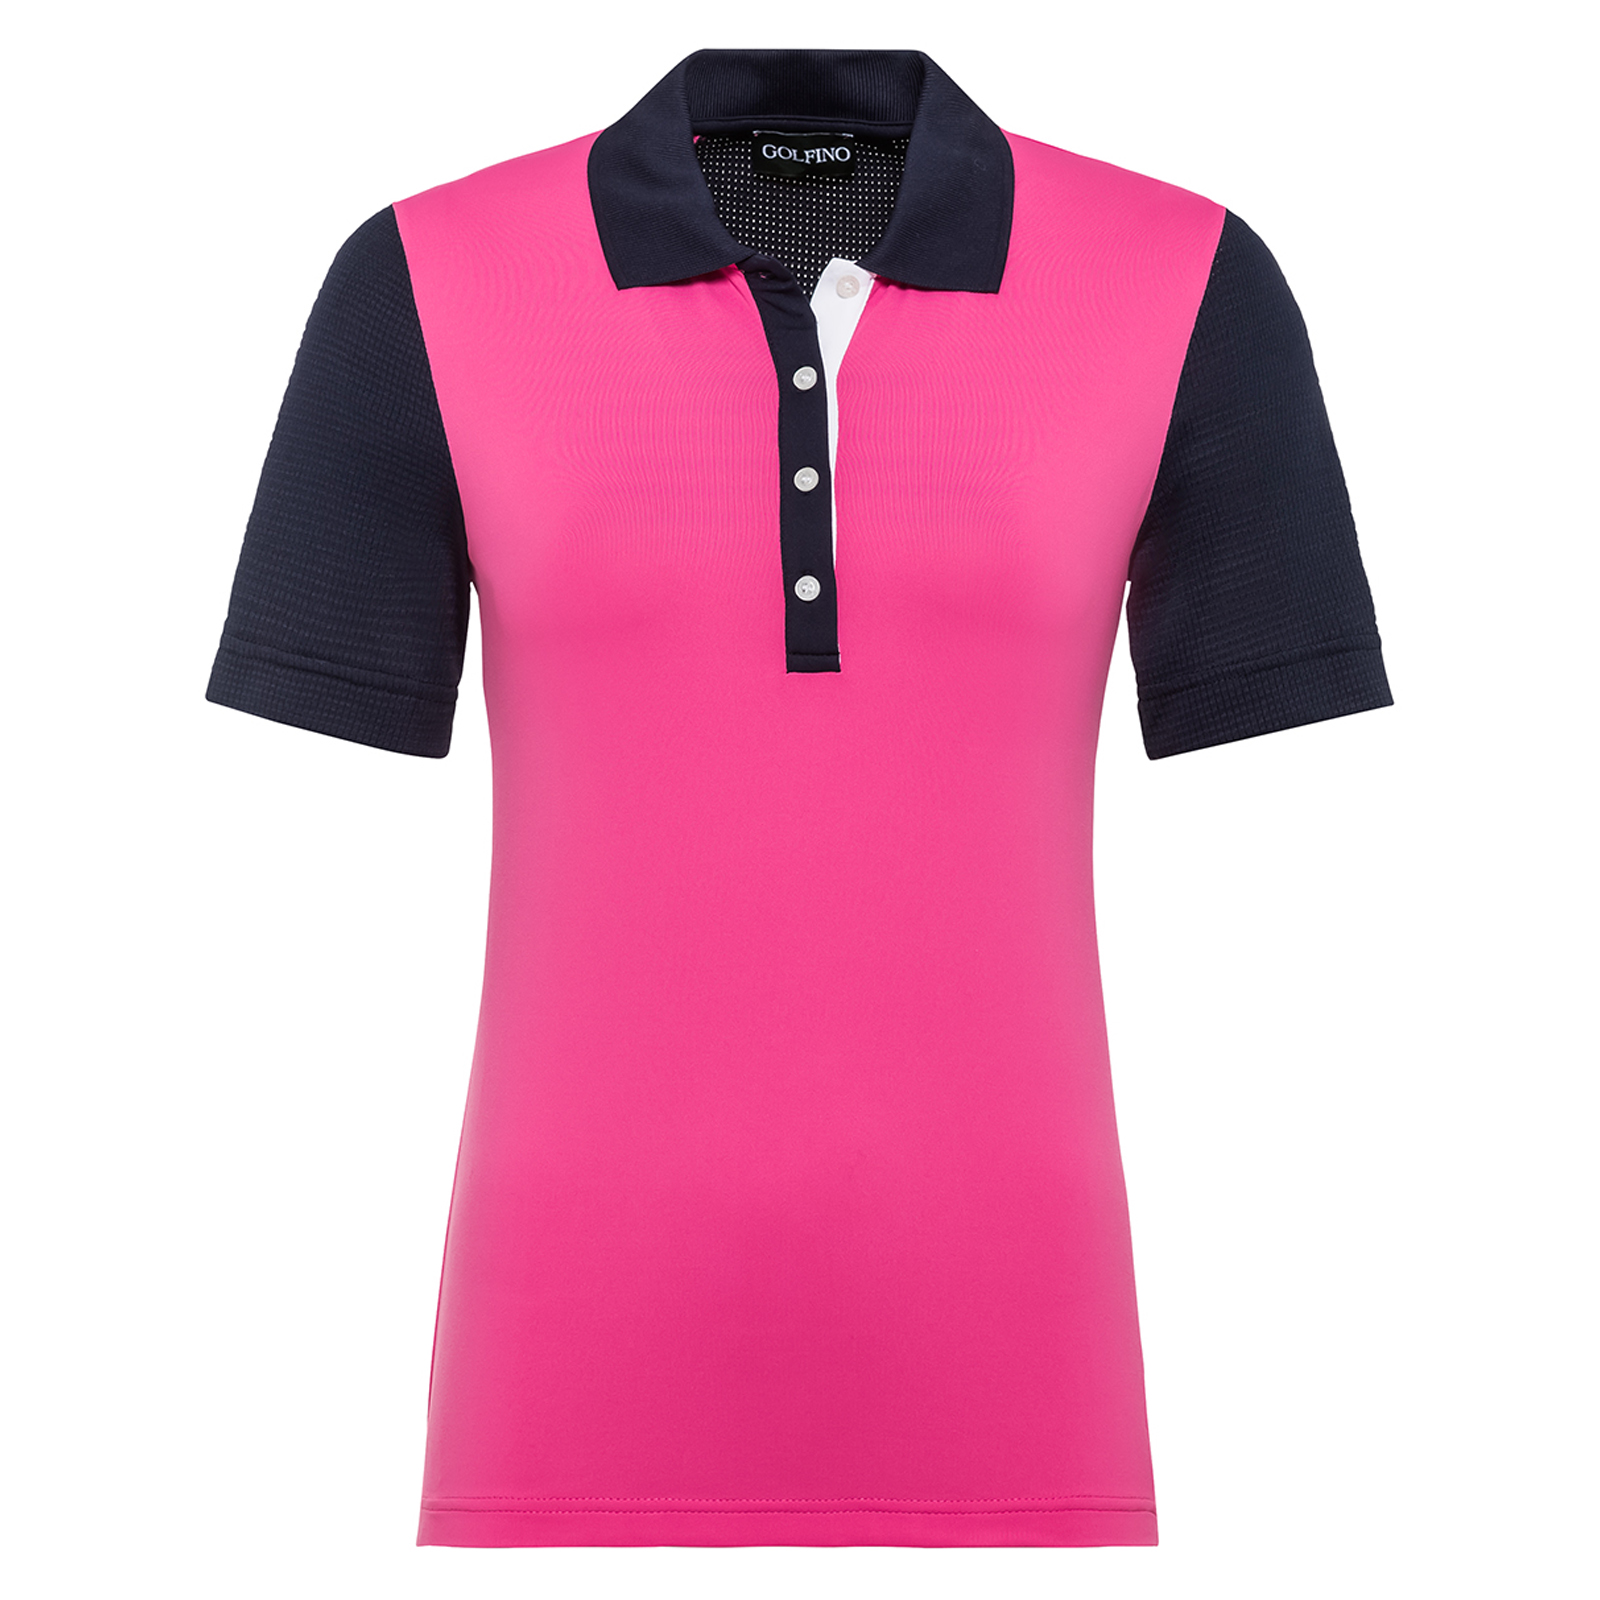 Ladies' polo shirt with sun protection function and mesh inserts in slim fit